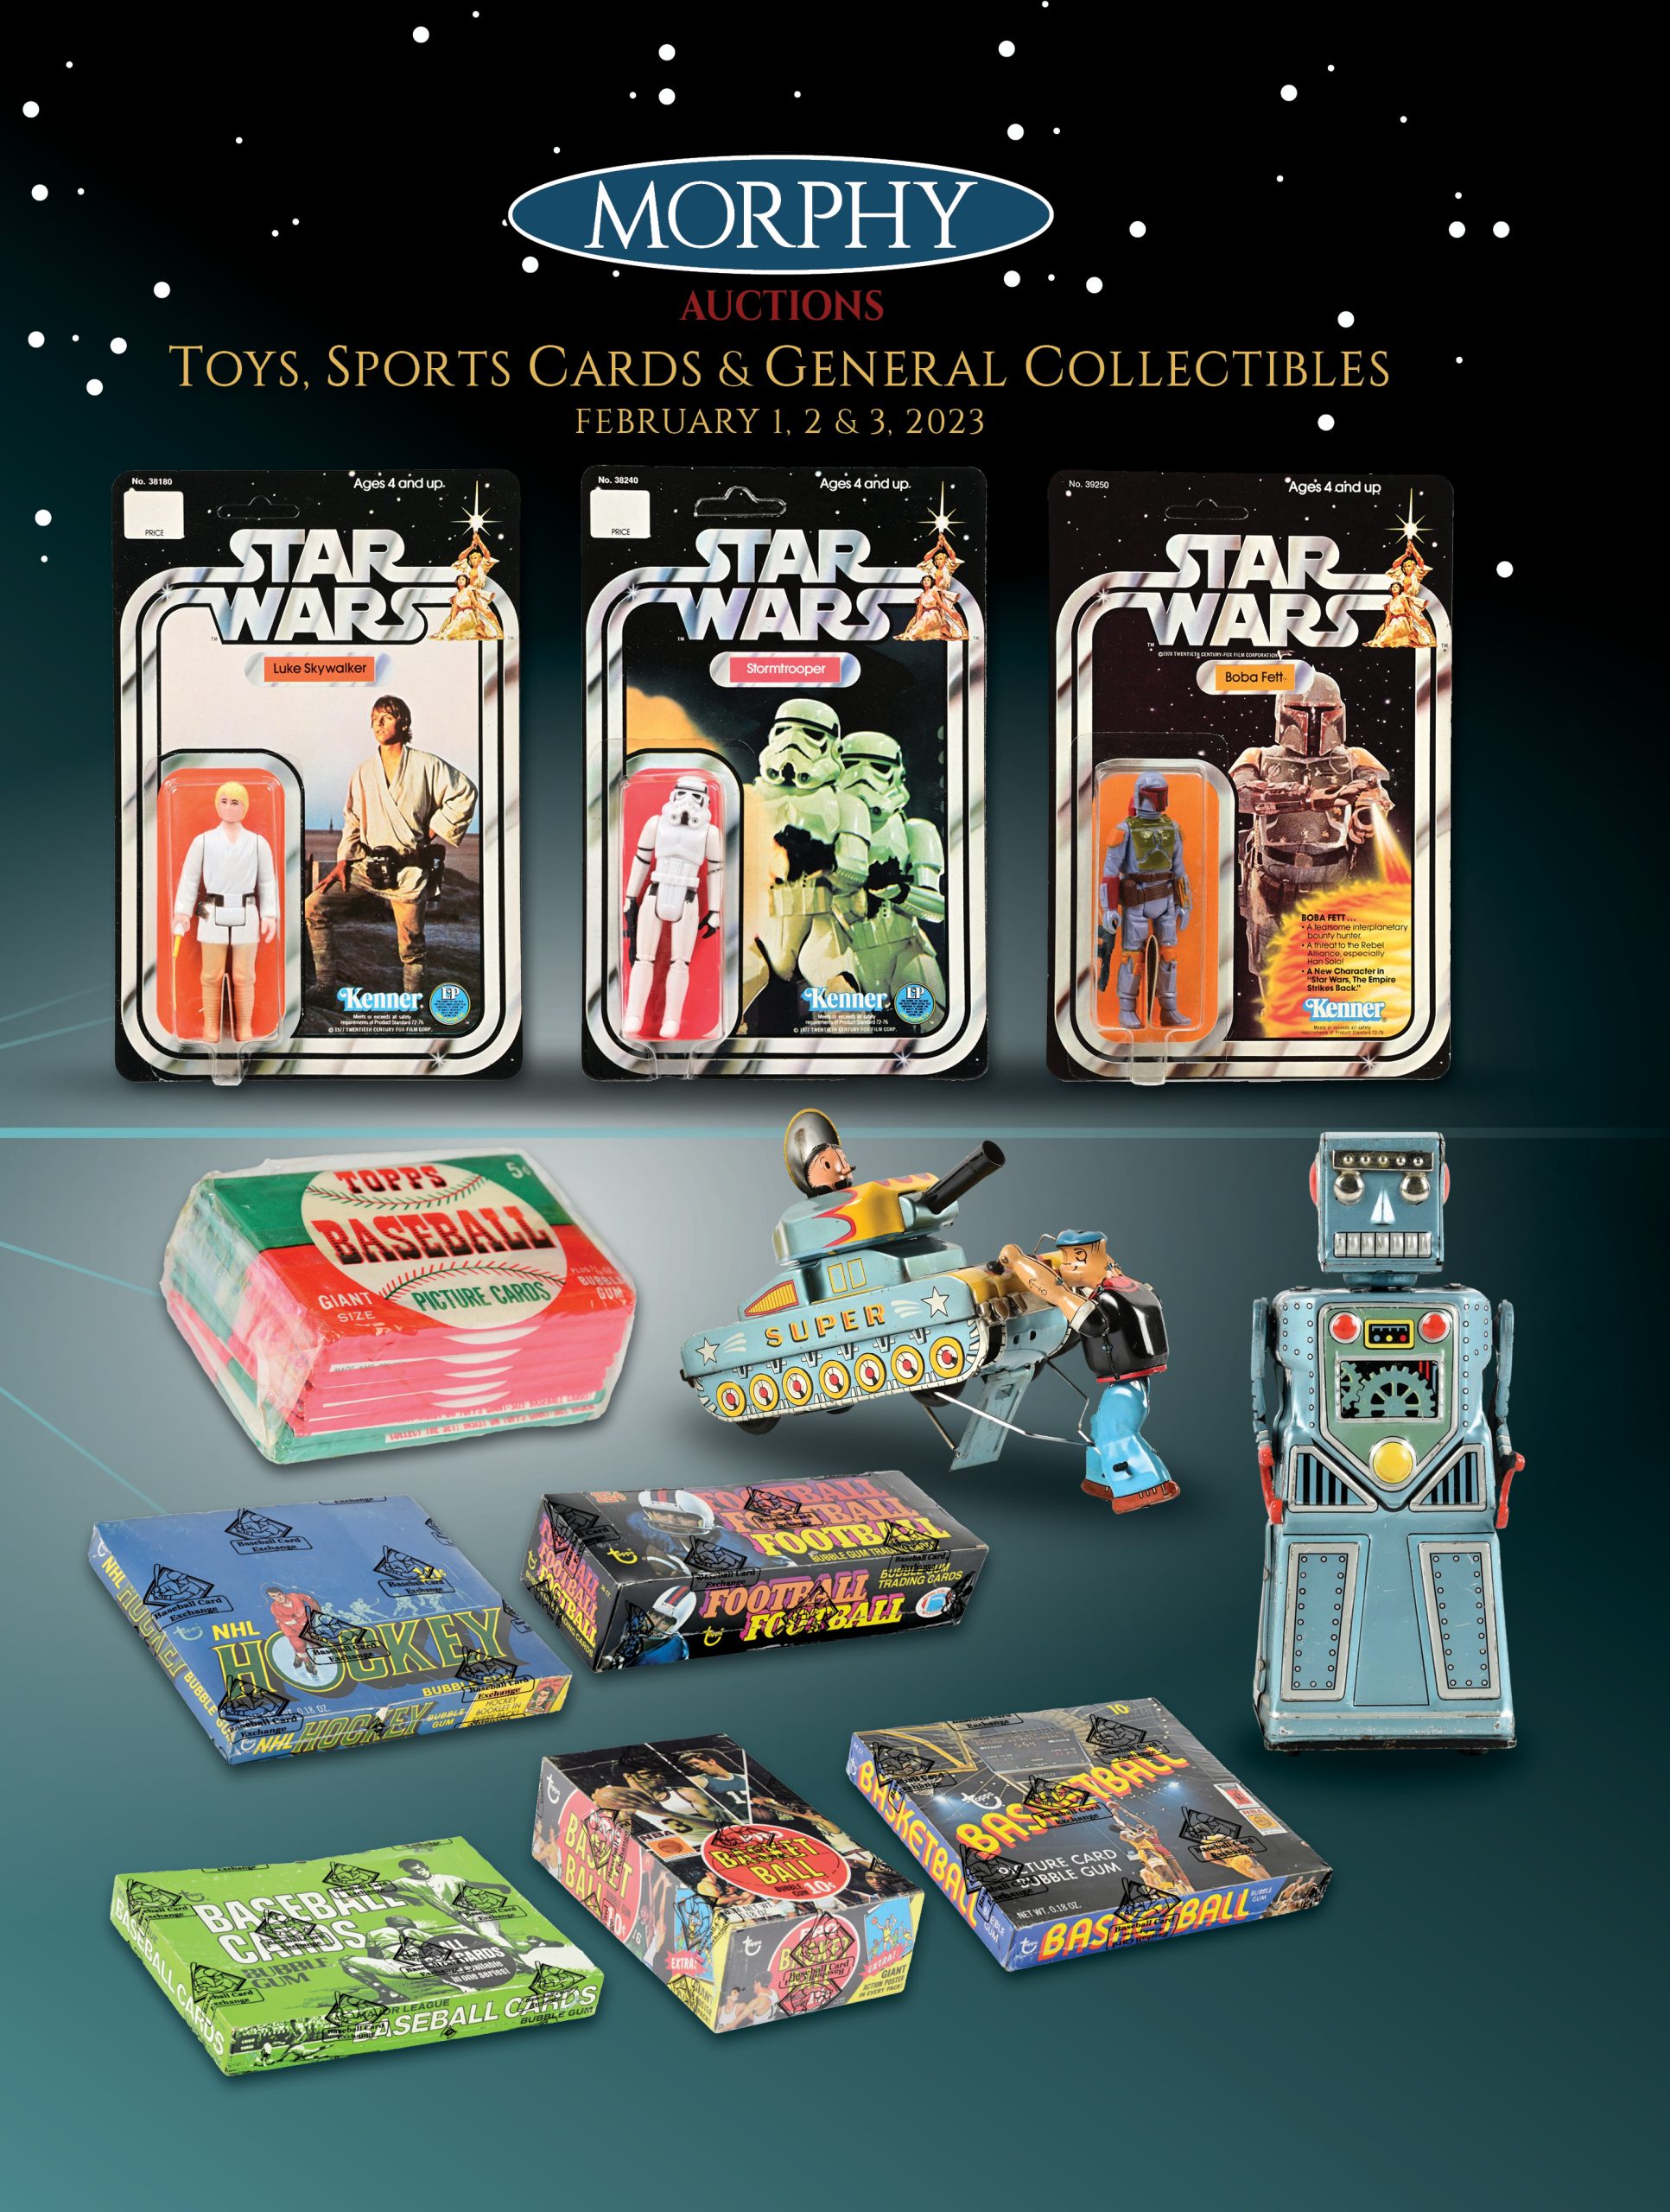 2023 Feb 1-3 Toys, Sports Cards & General Collectibles by Morphy